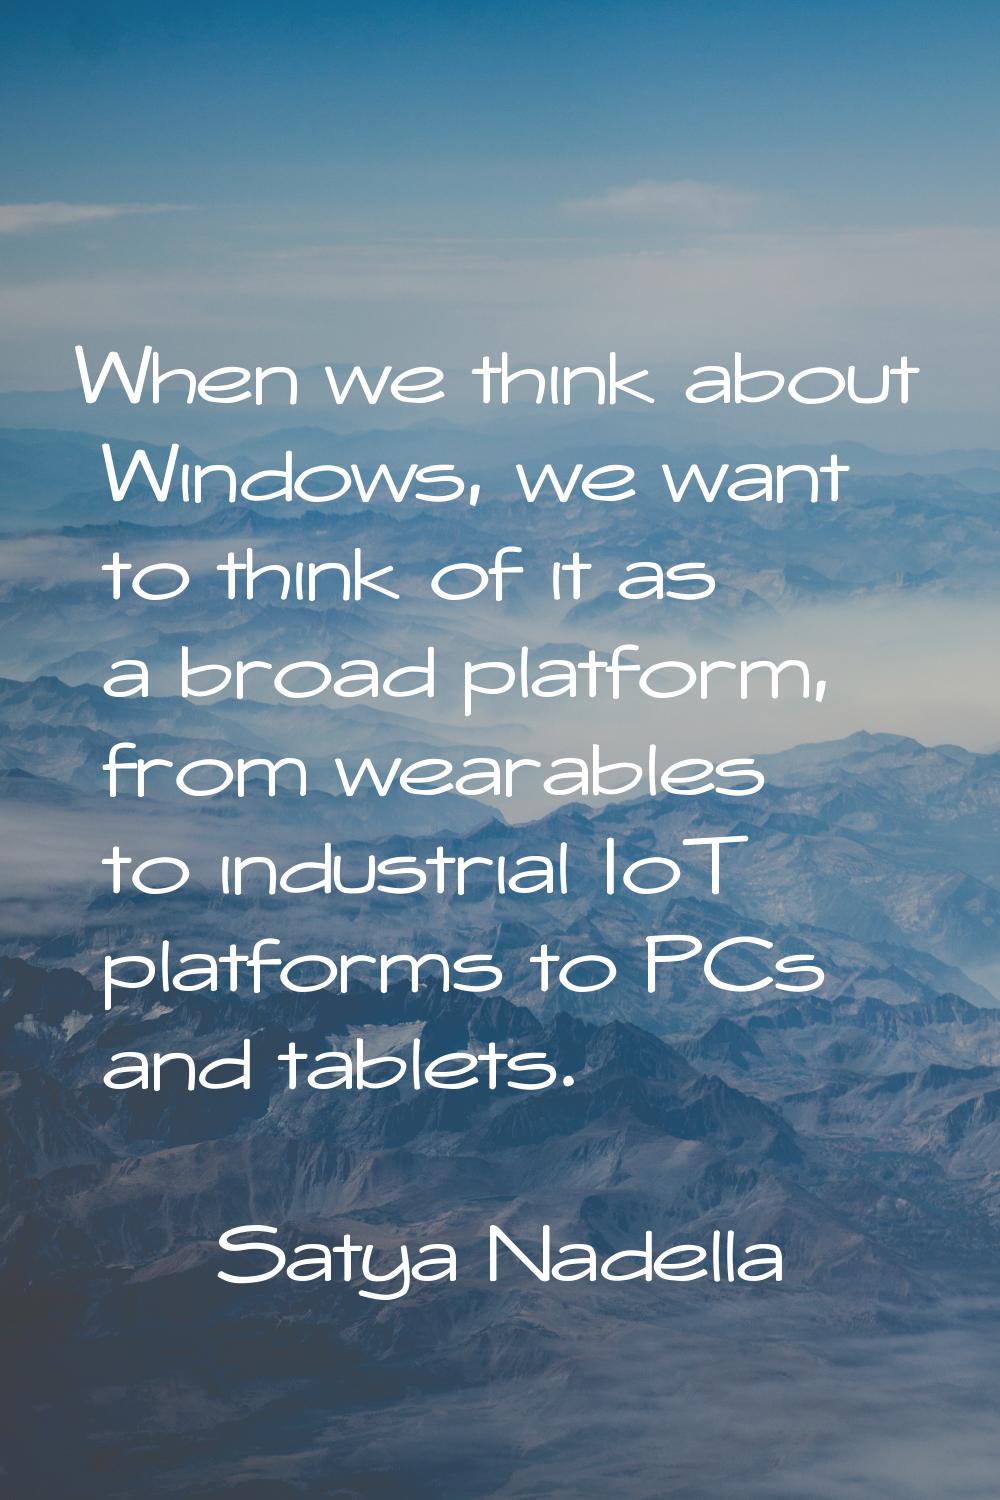 When we think about Windows, we want to think of it as a broad platform, from wearables to industri